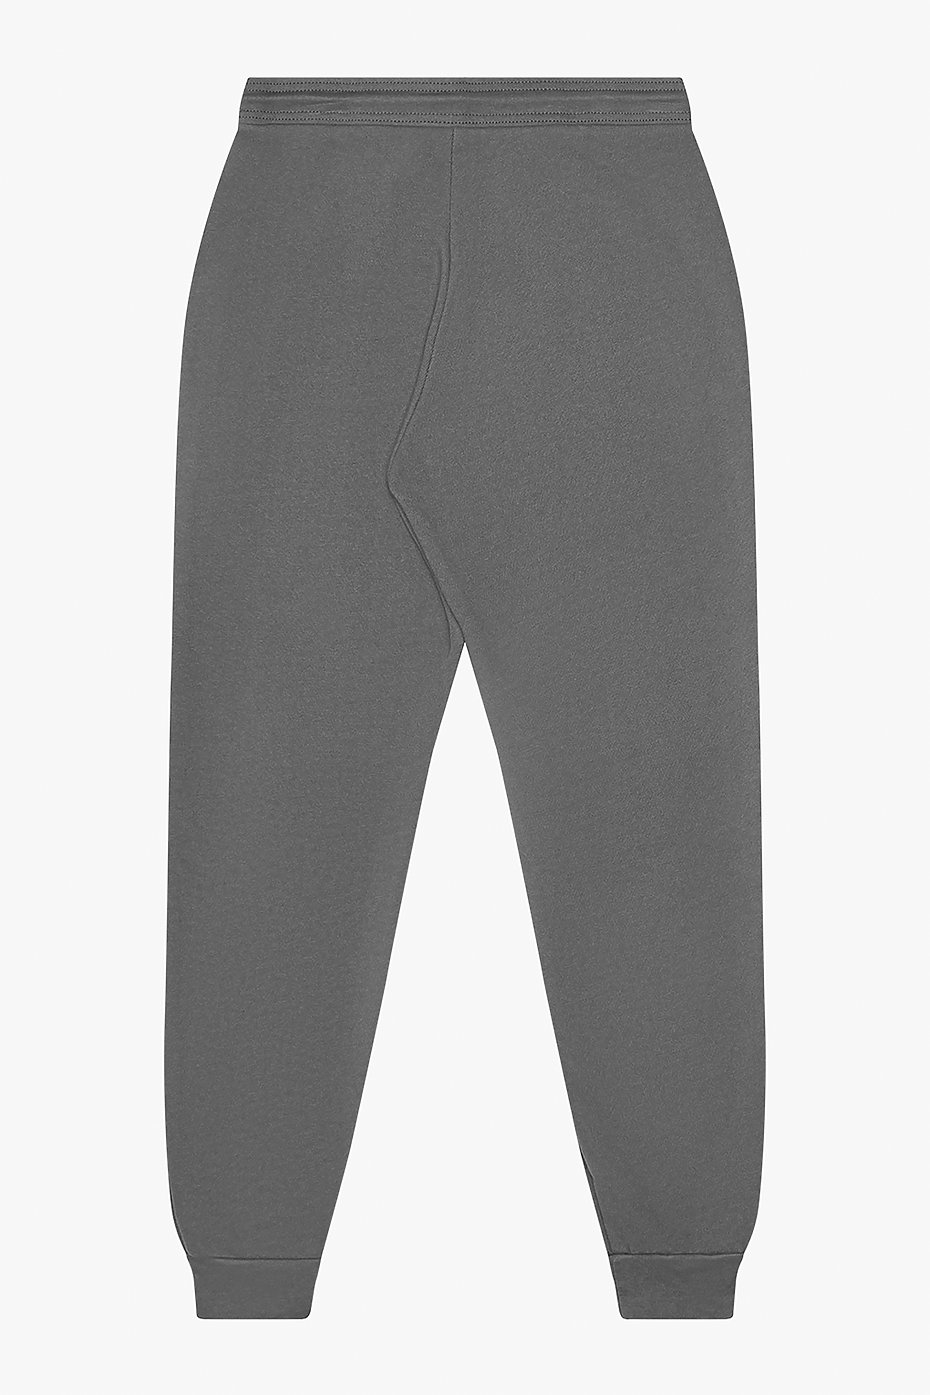 Trendy Durable Jogger Sets Wholesale Products 